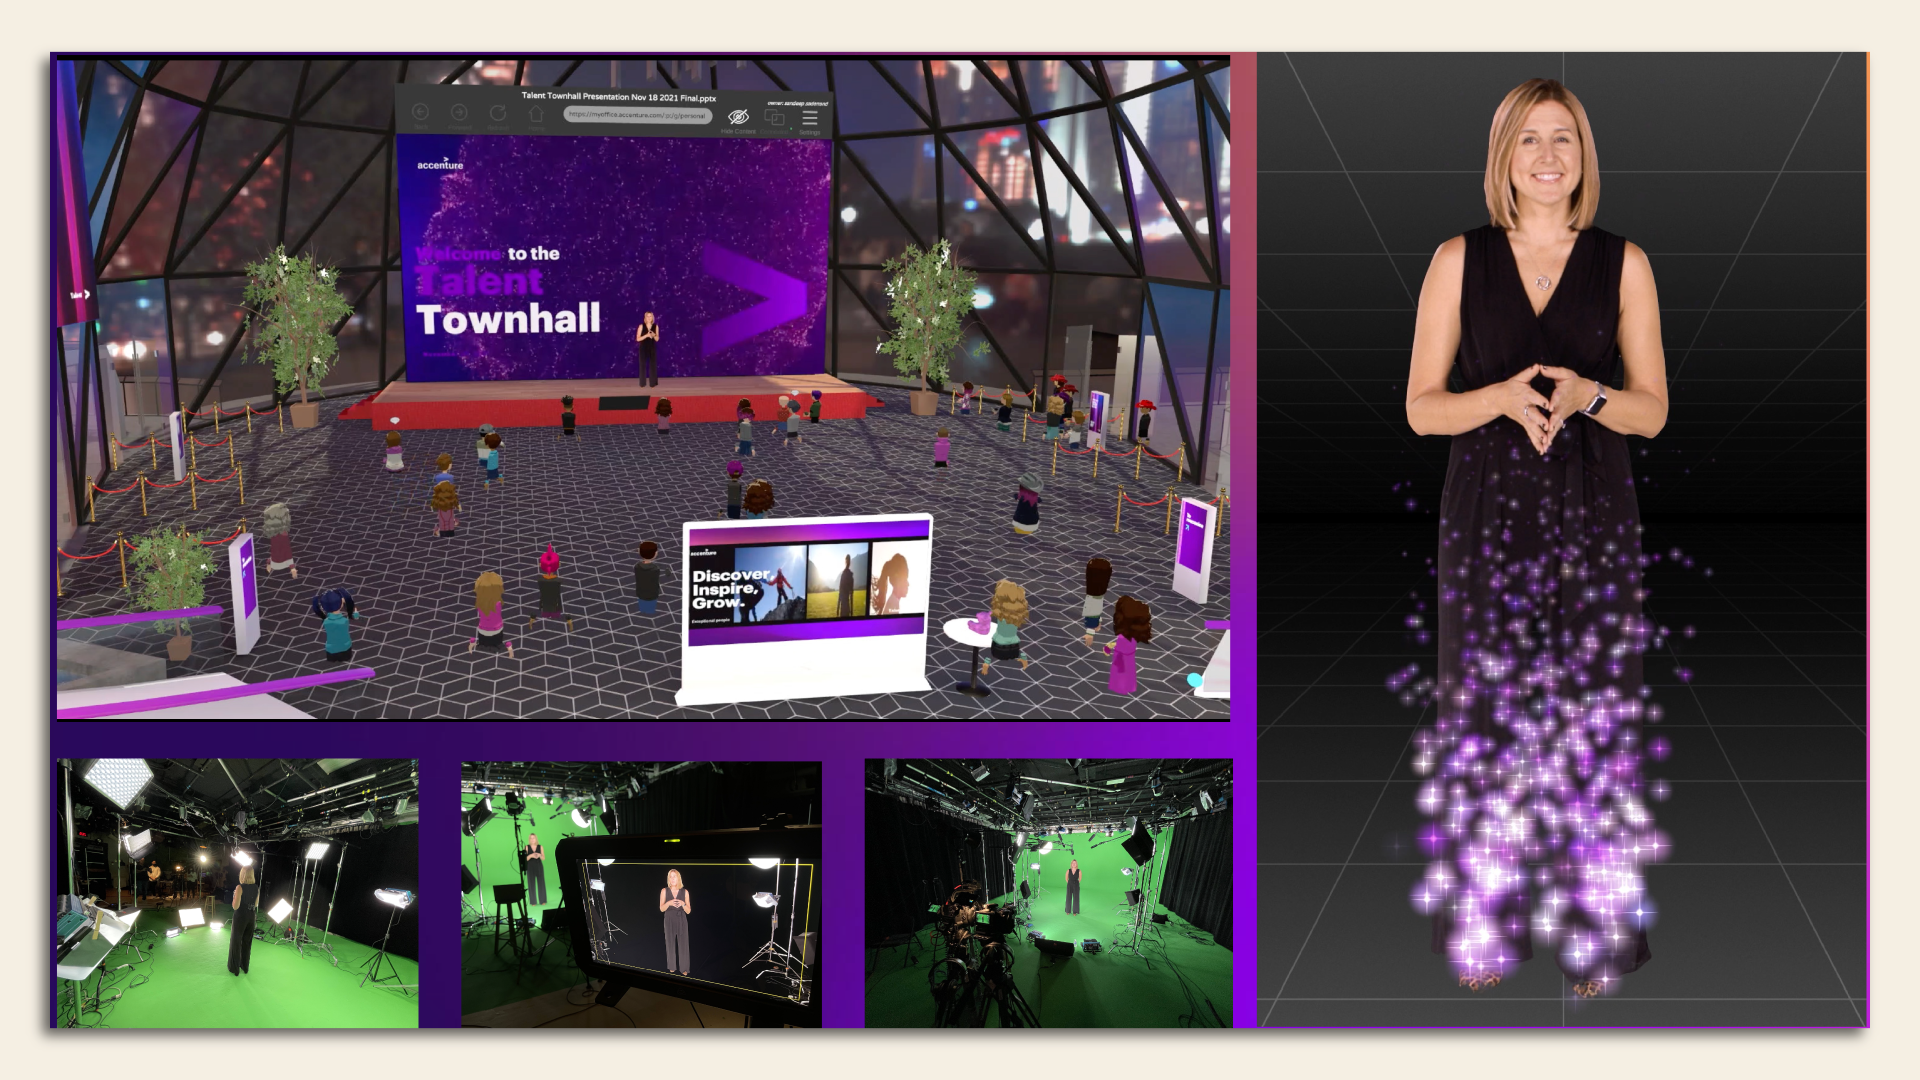 Photo: The making of Accenture's employee trainings in the metaverse. Photo: Accenture